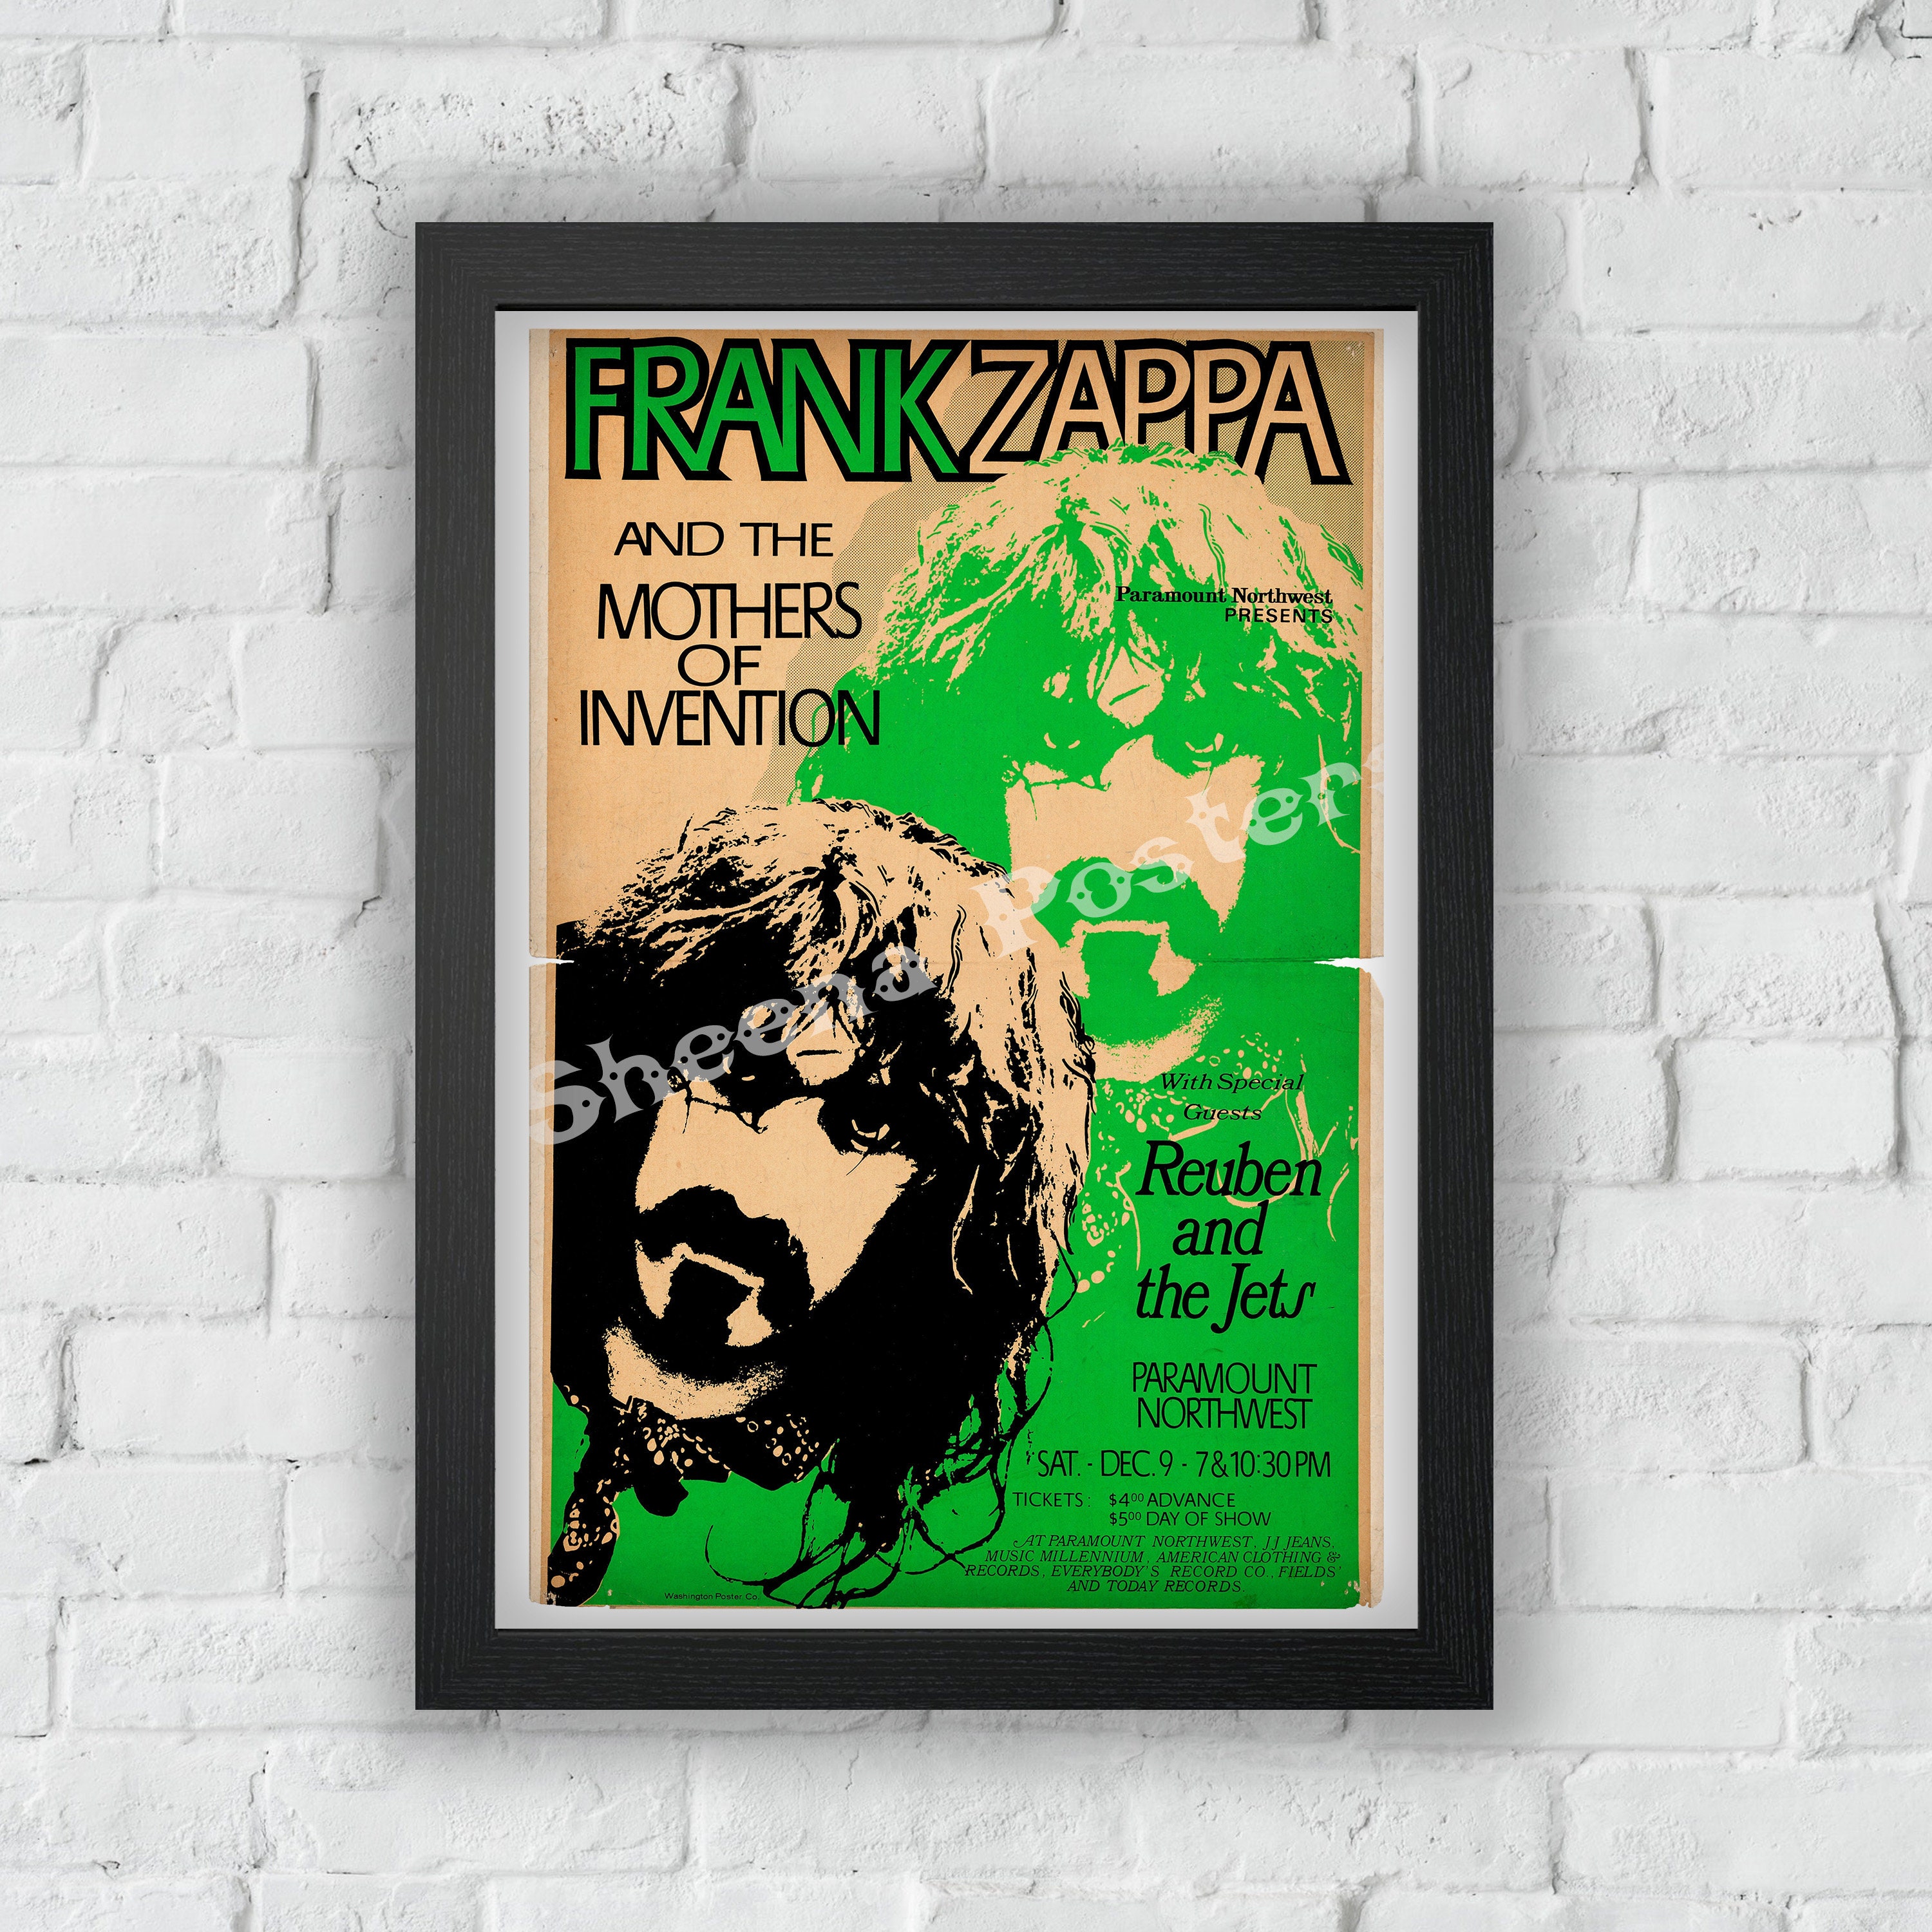 Frank Zappa - This Day In Music